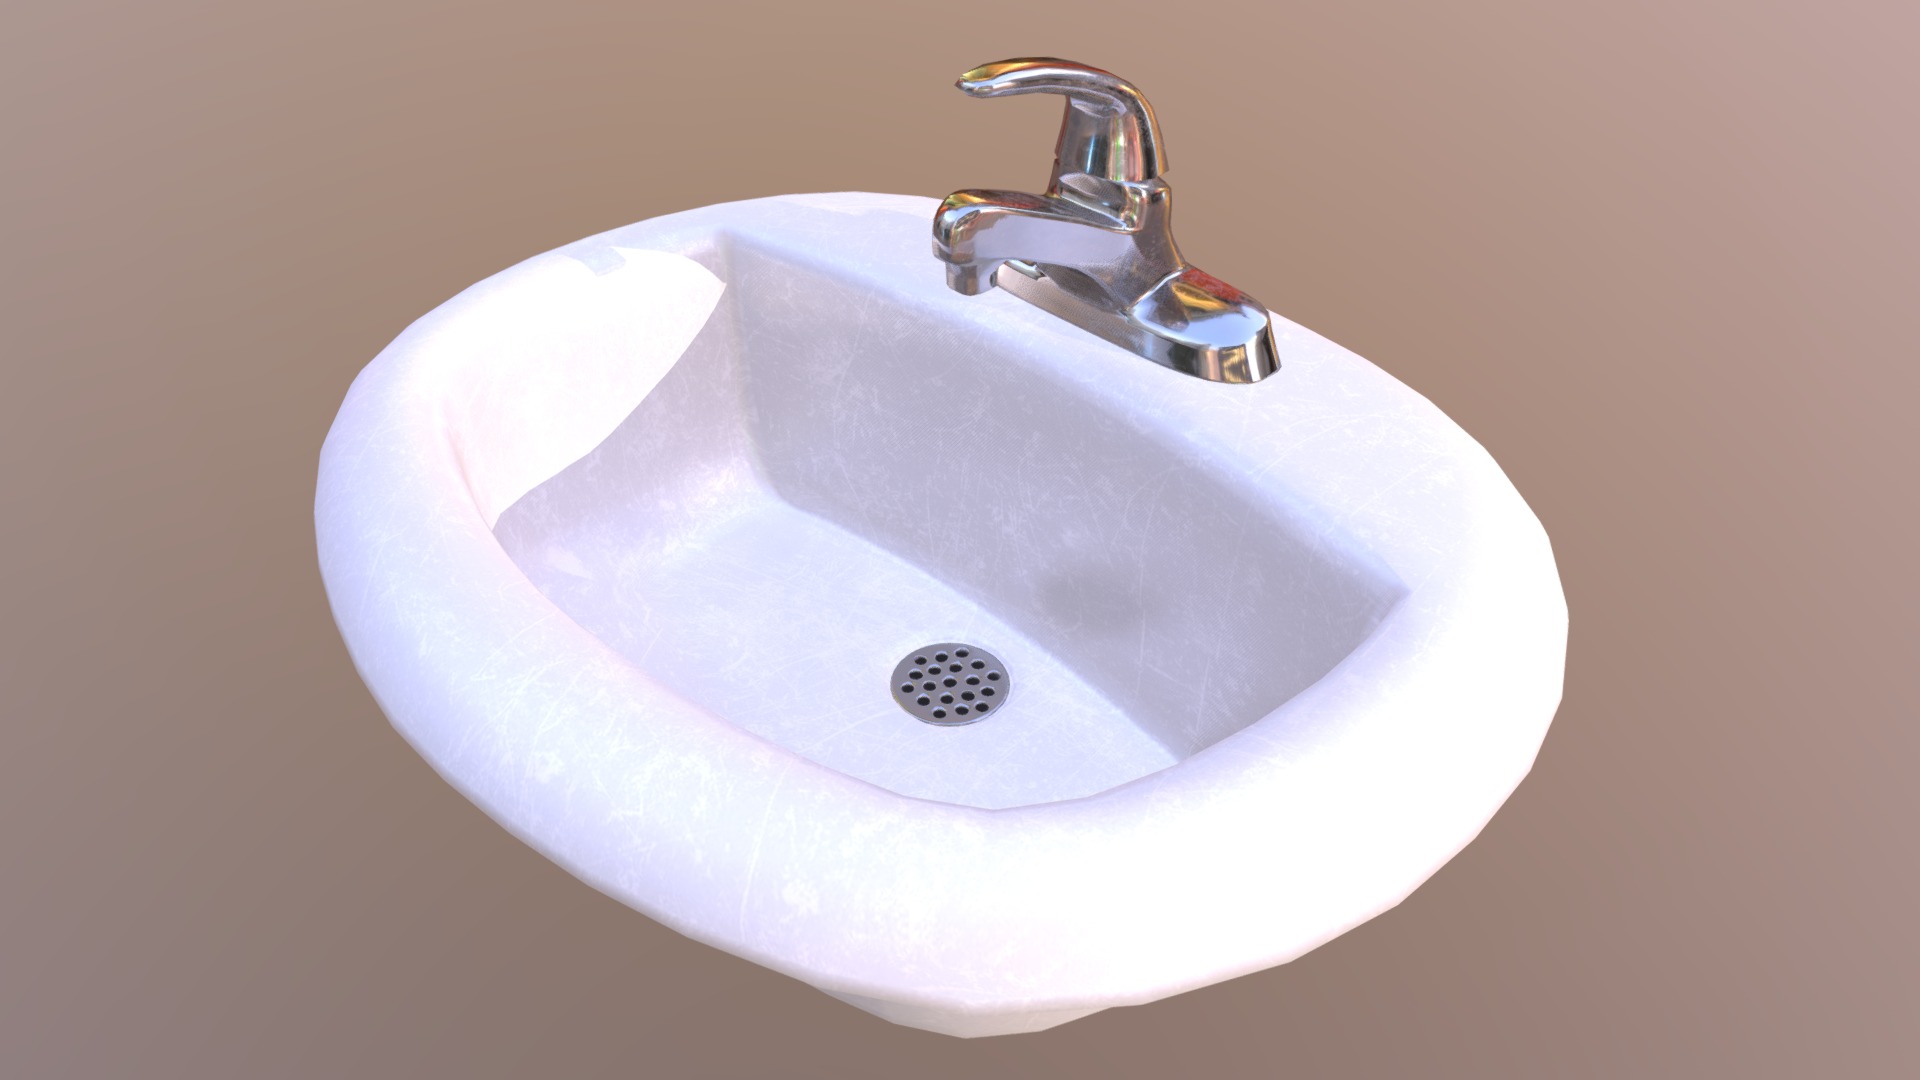 3D model Bathroom Sink - This is a 3D model of the Bathroom Sink. The 3D model is about a white sink with a faucet.